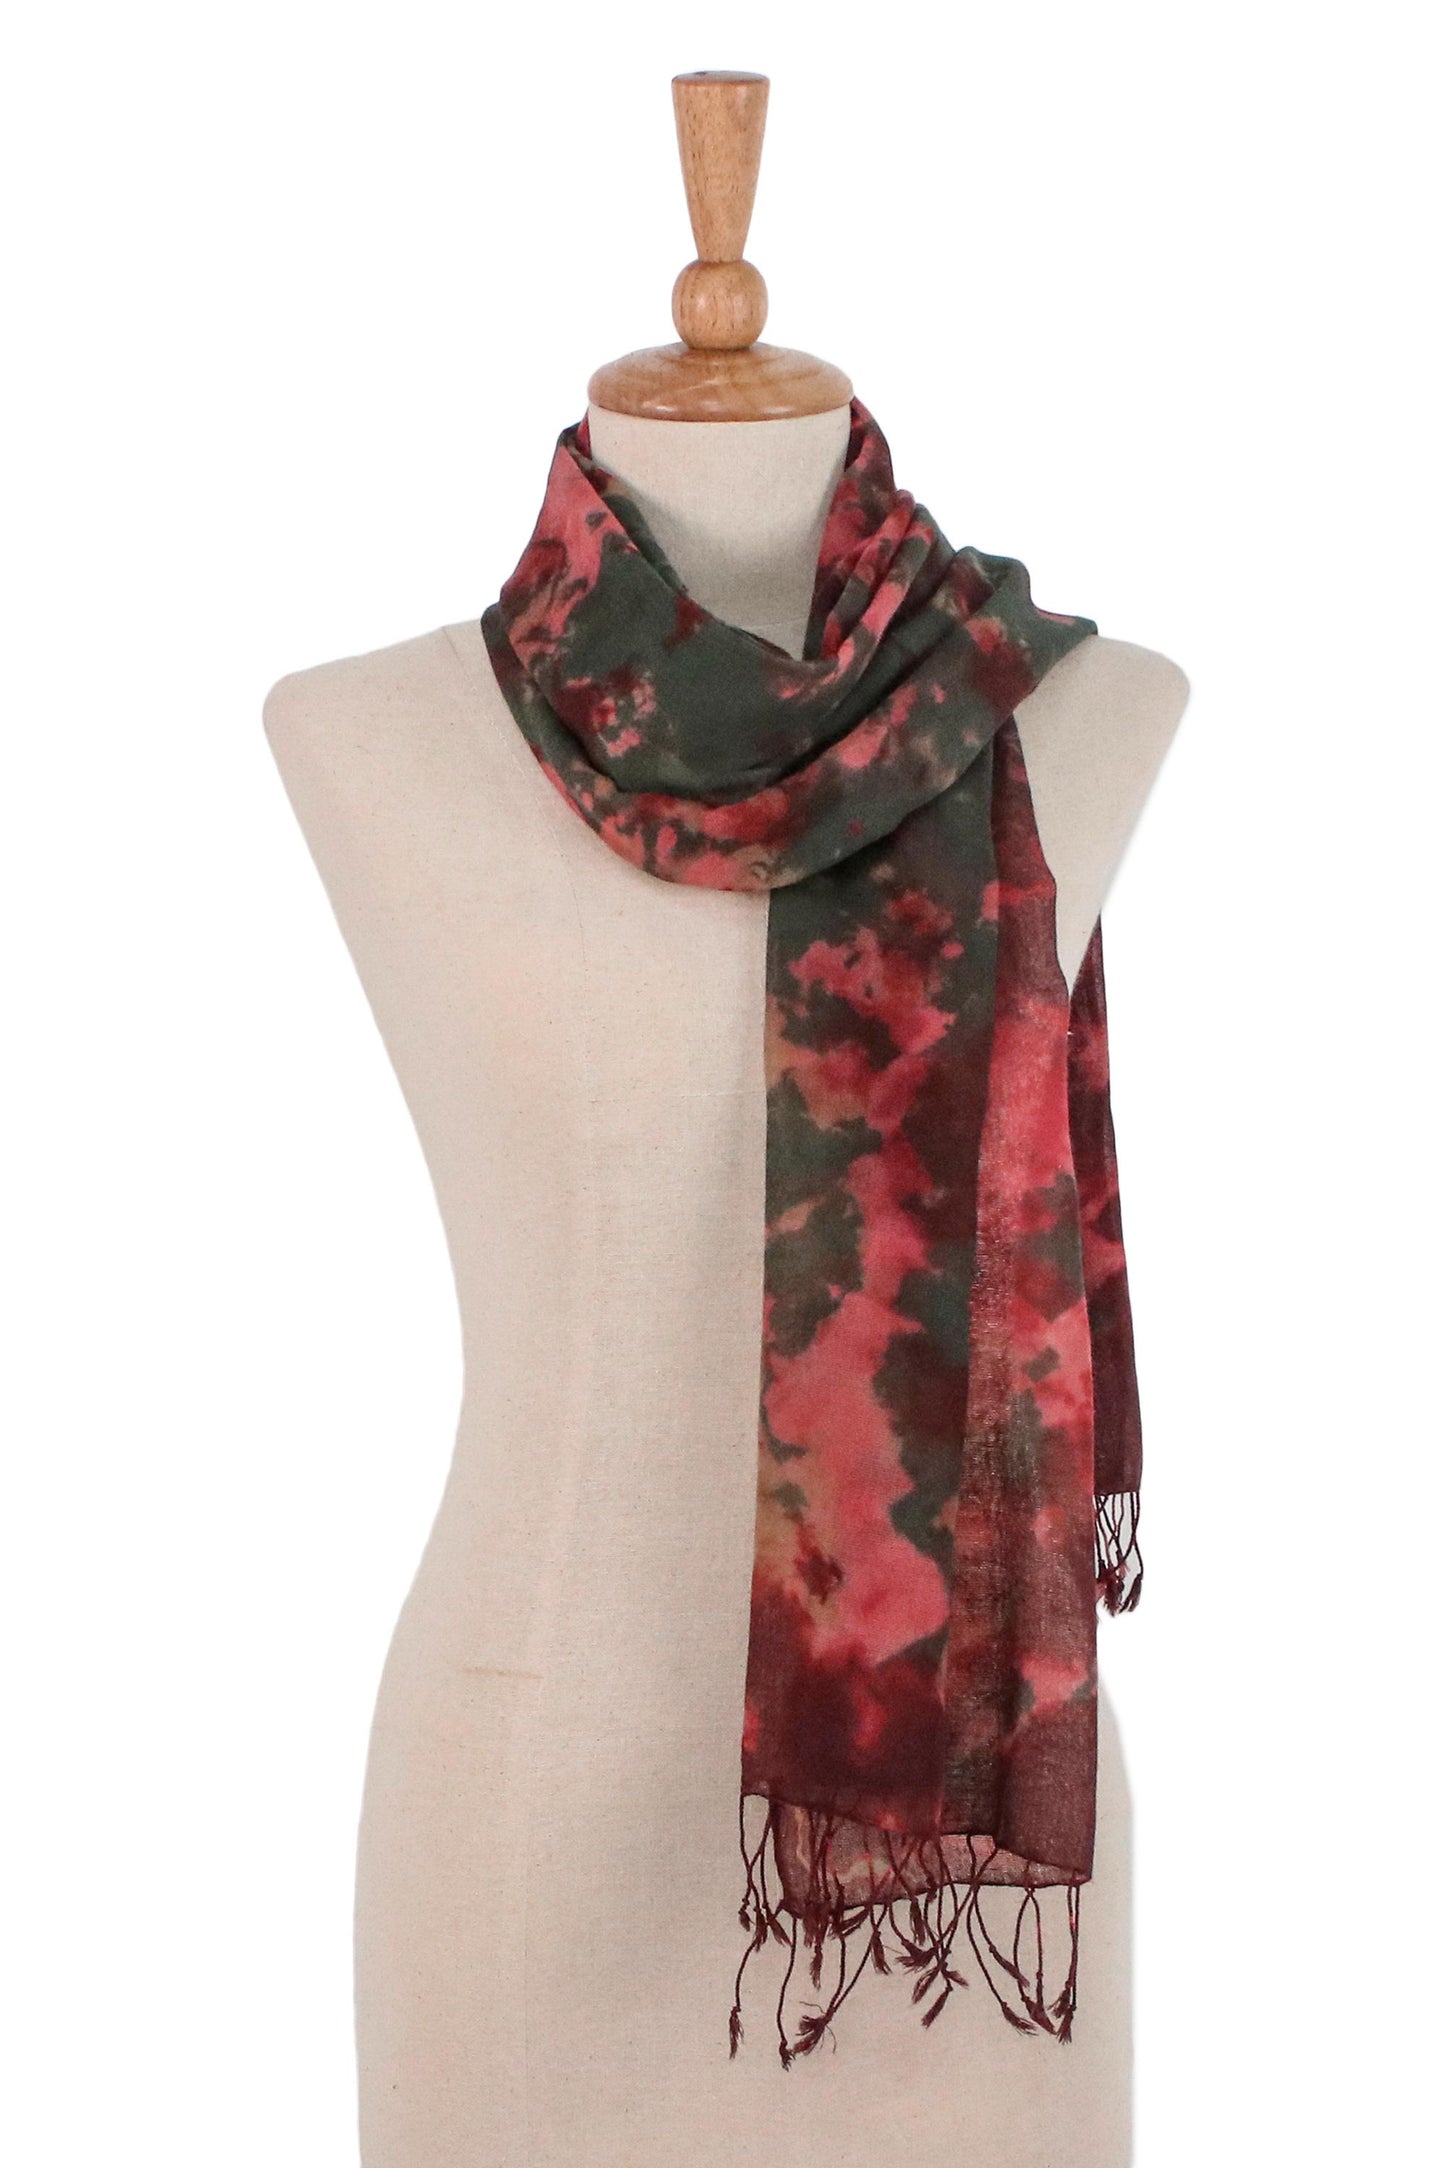 Heated Colors Tie-Dyed Cotton Wrap Scarf in Red from Thailand